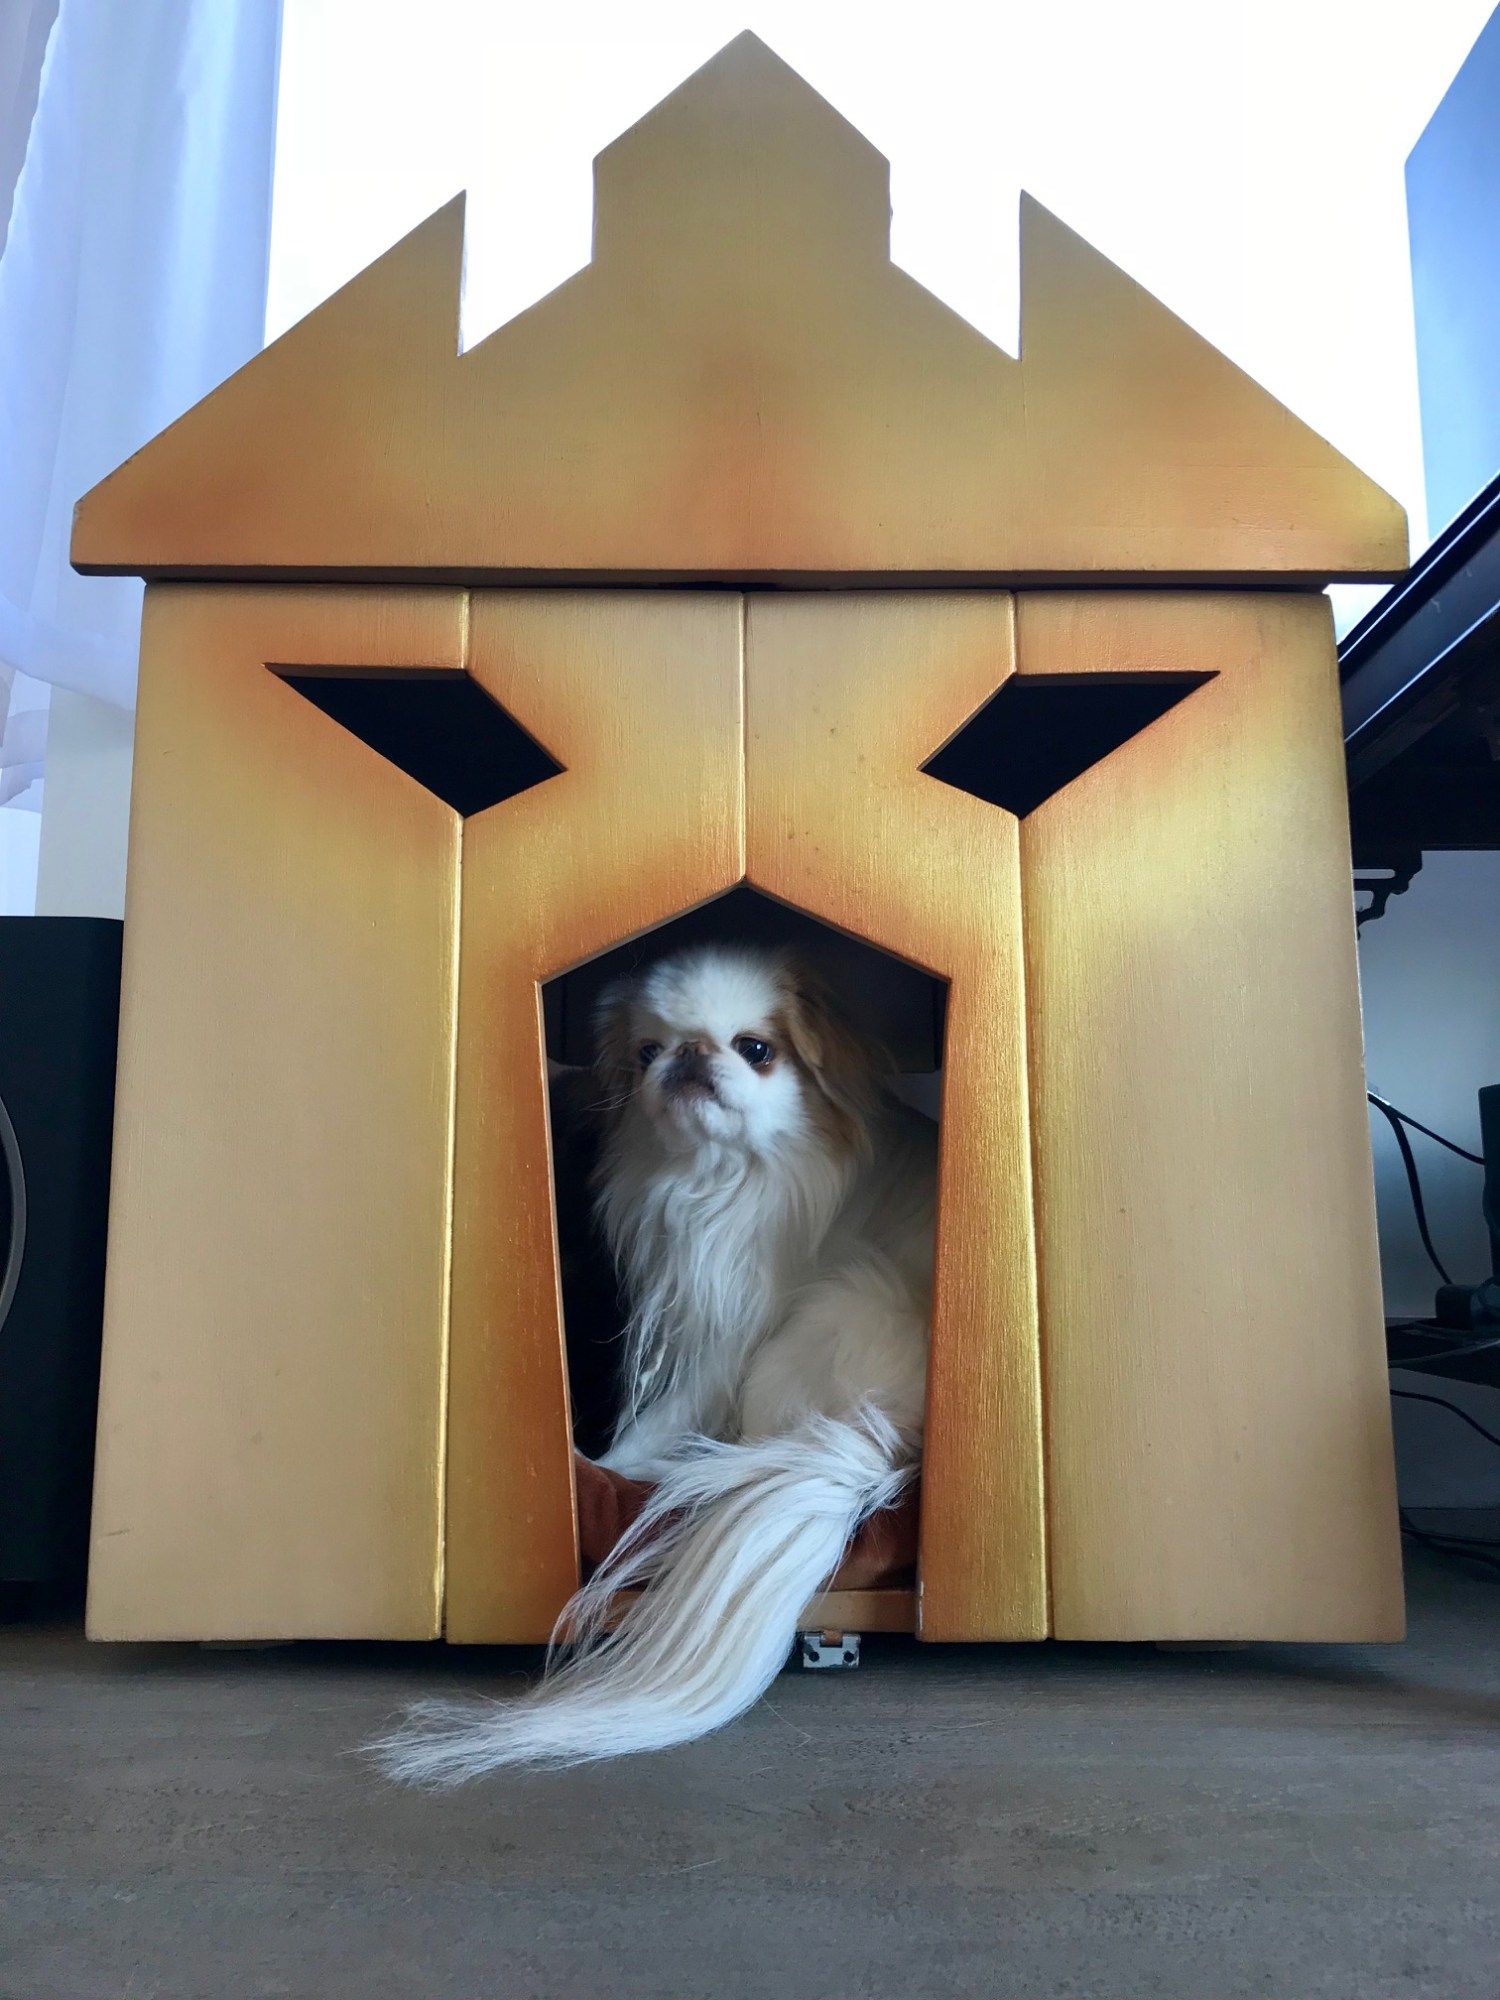 Michelle built this dog house for her dog.